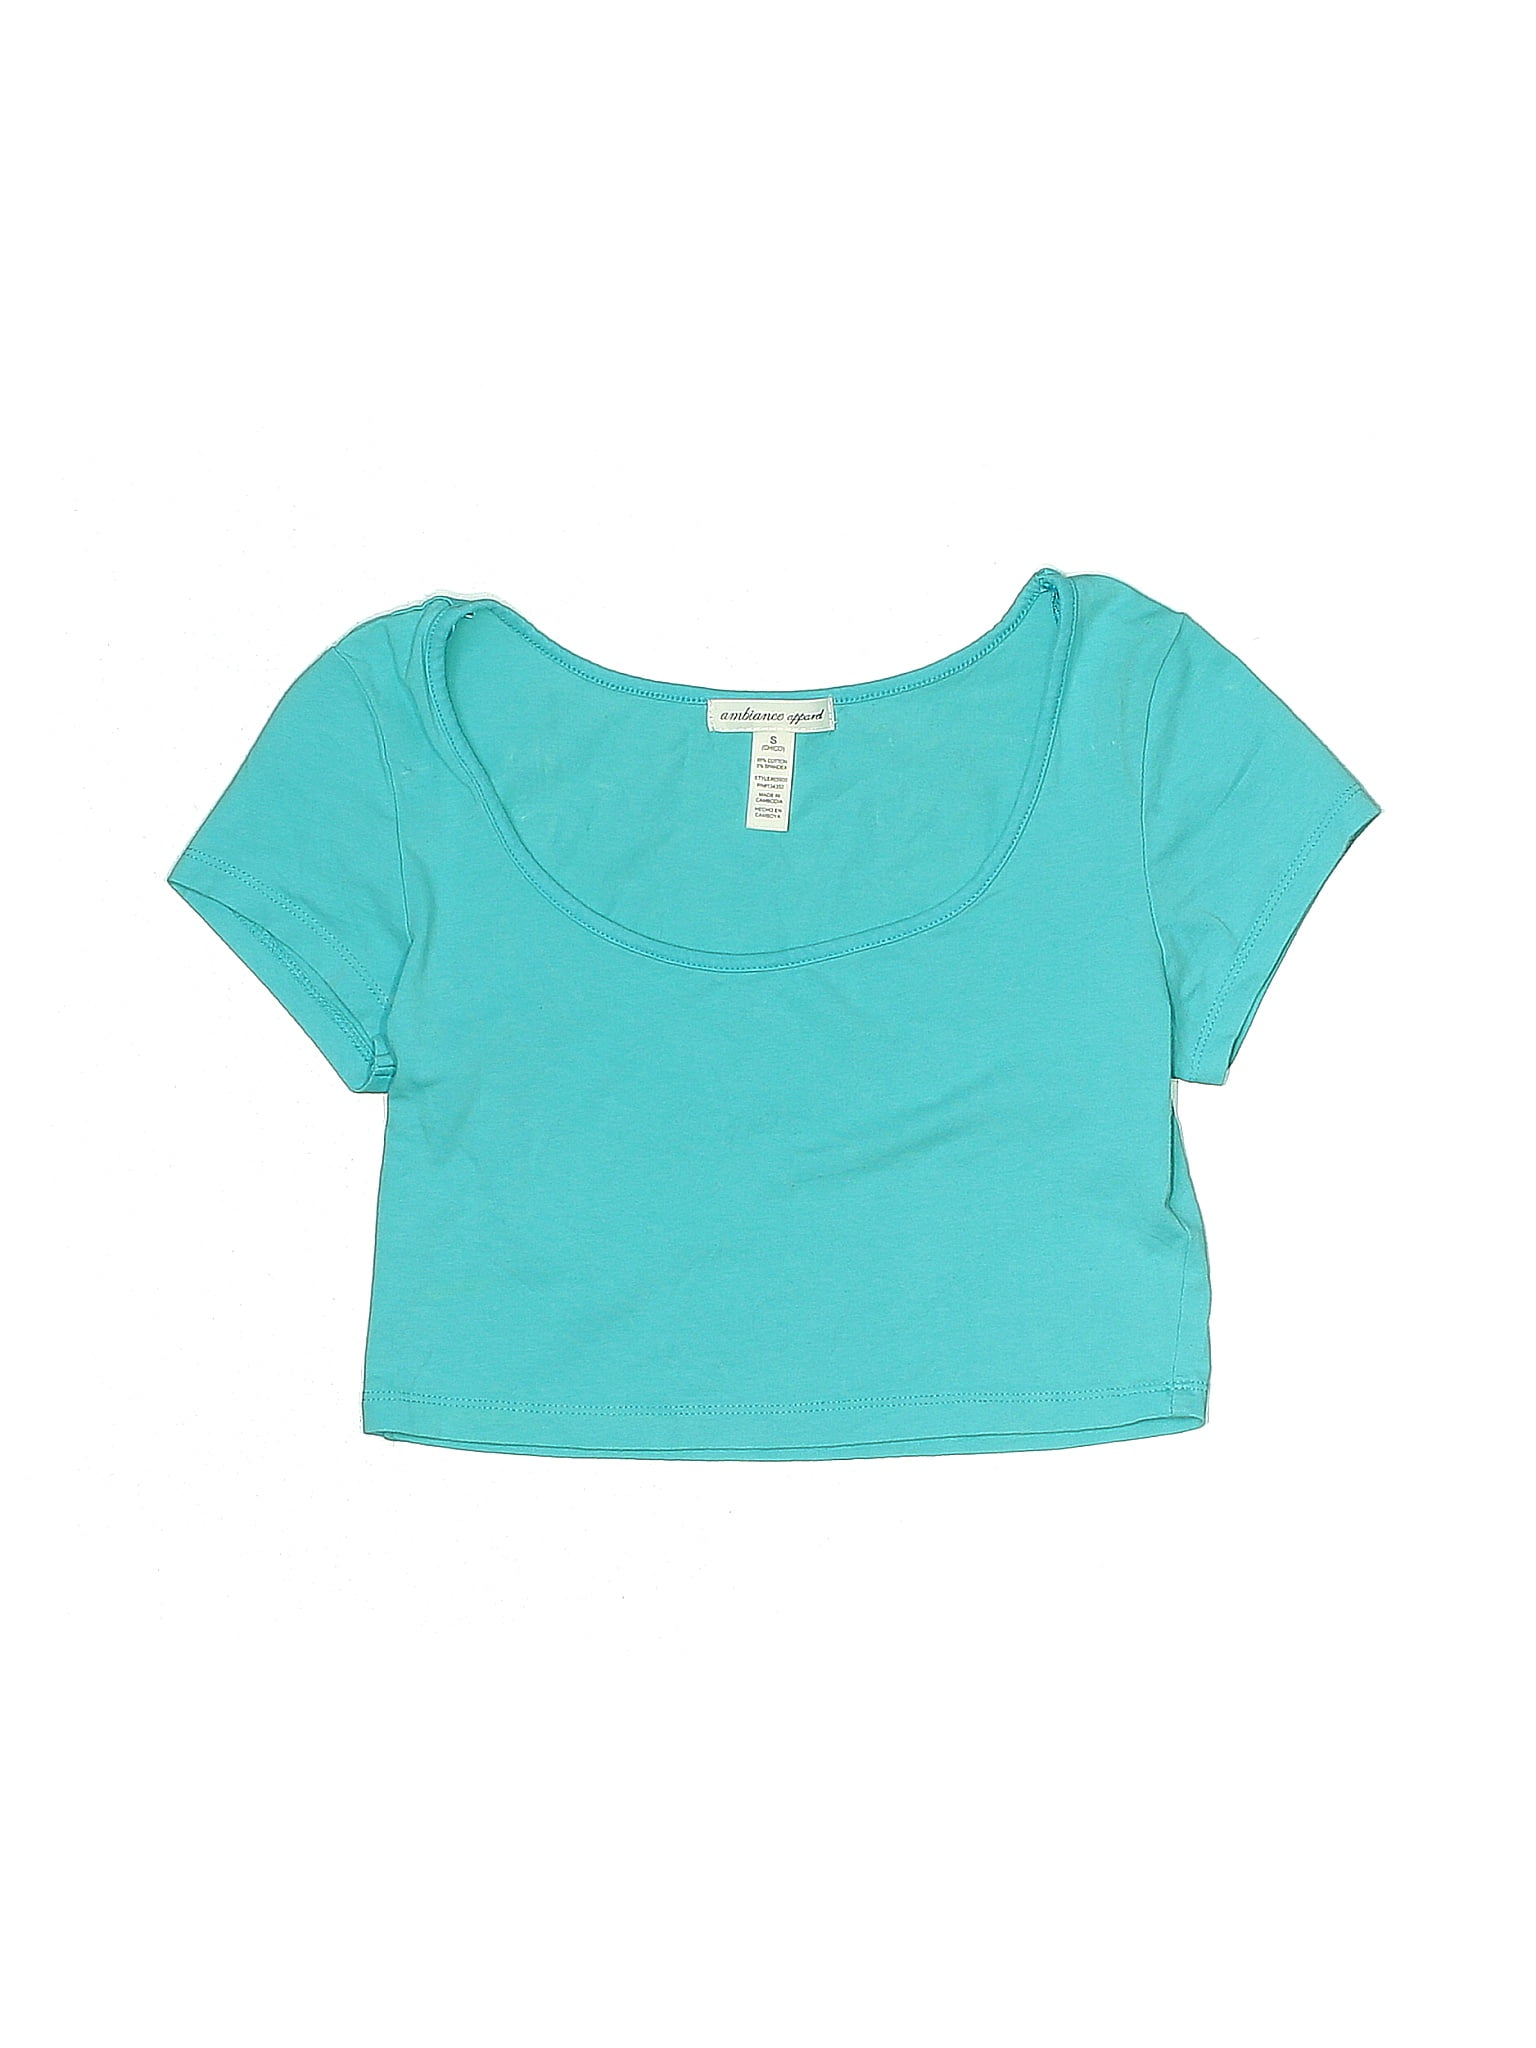 Ambiance Apparel Girls' Clothing On Sale Up To 90% Off Retail